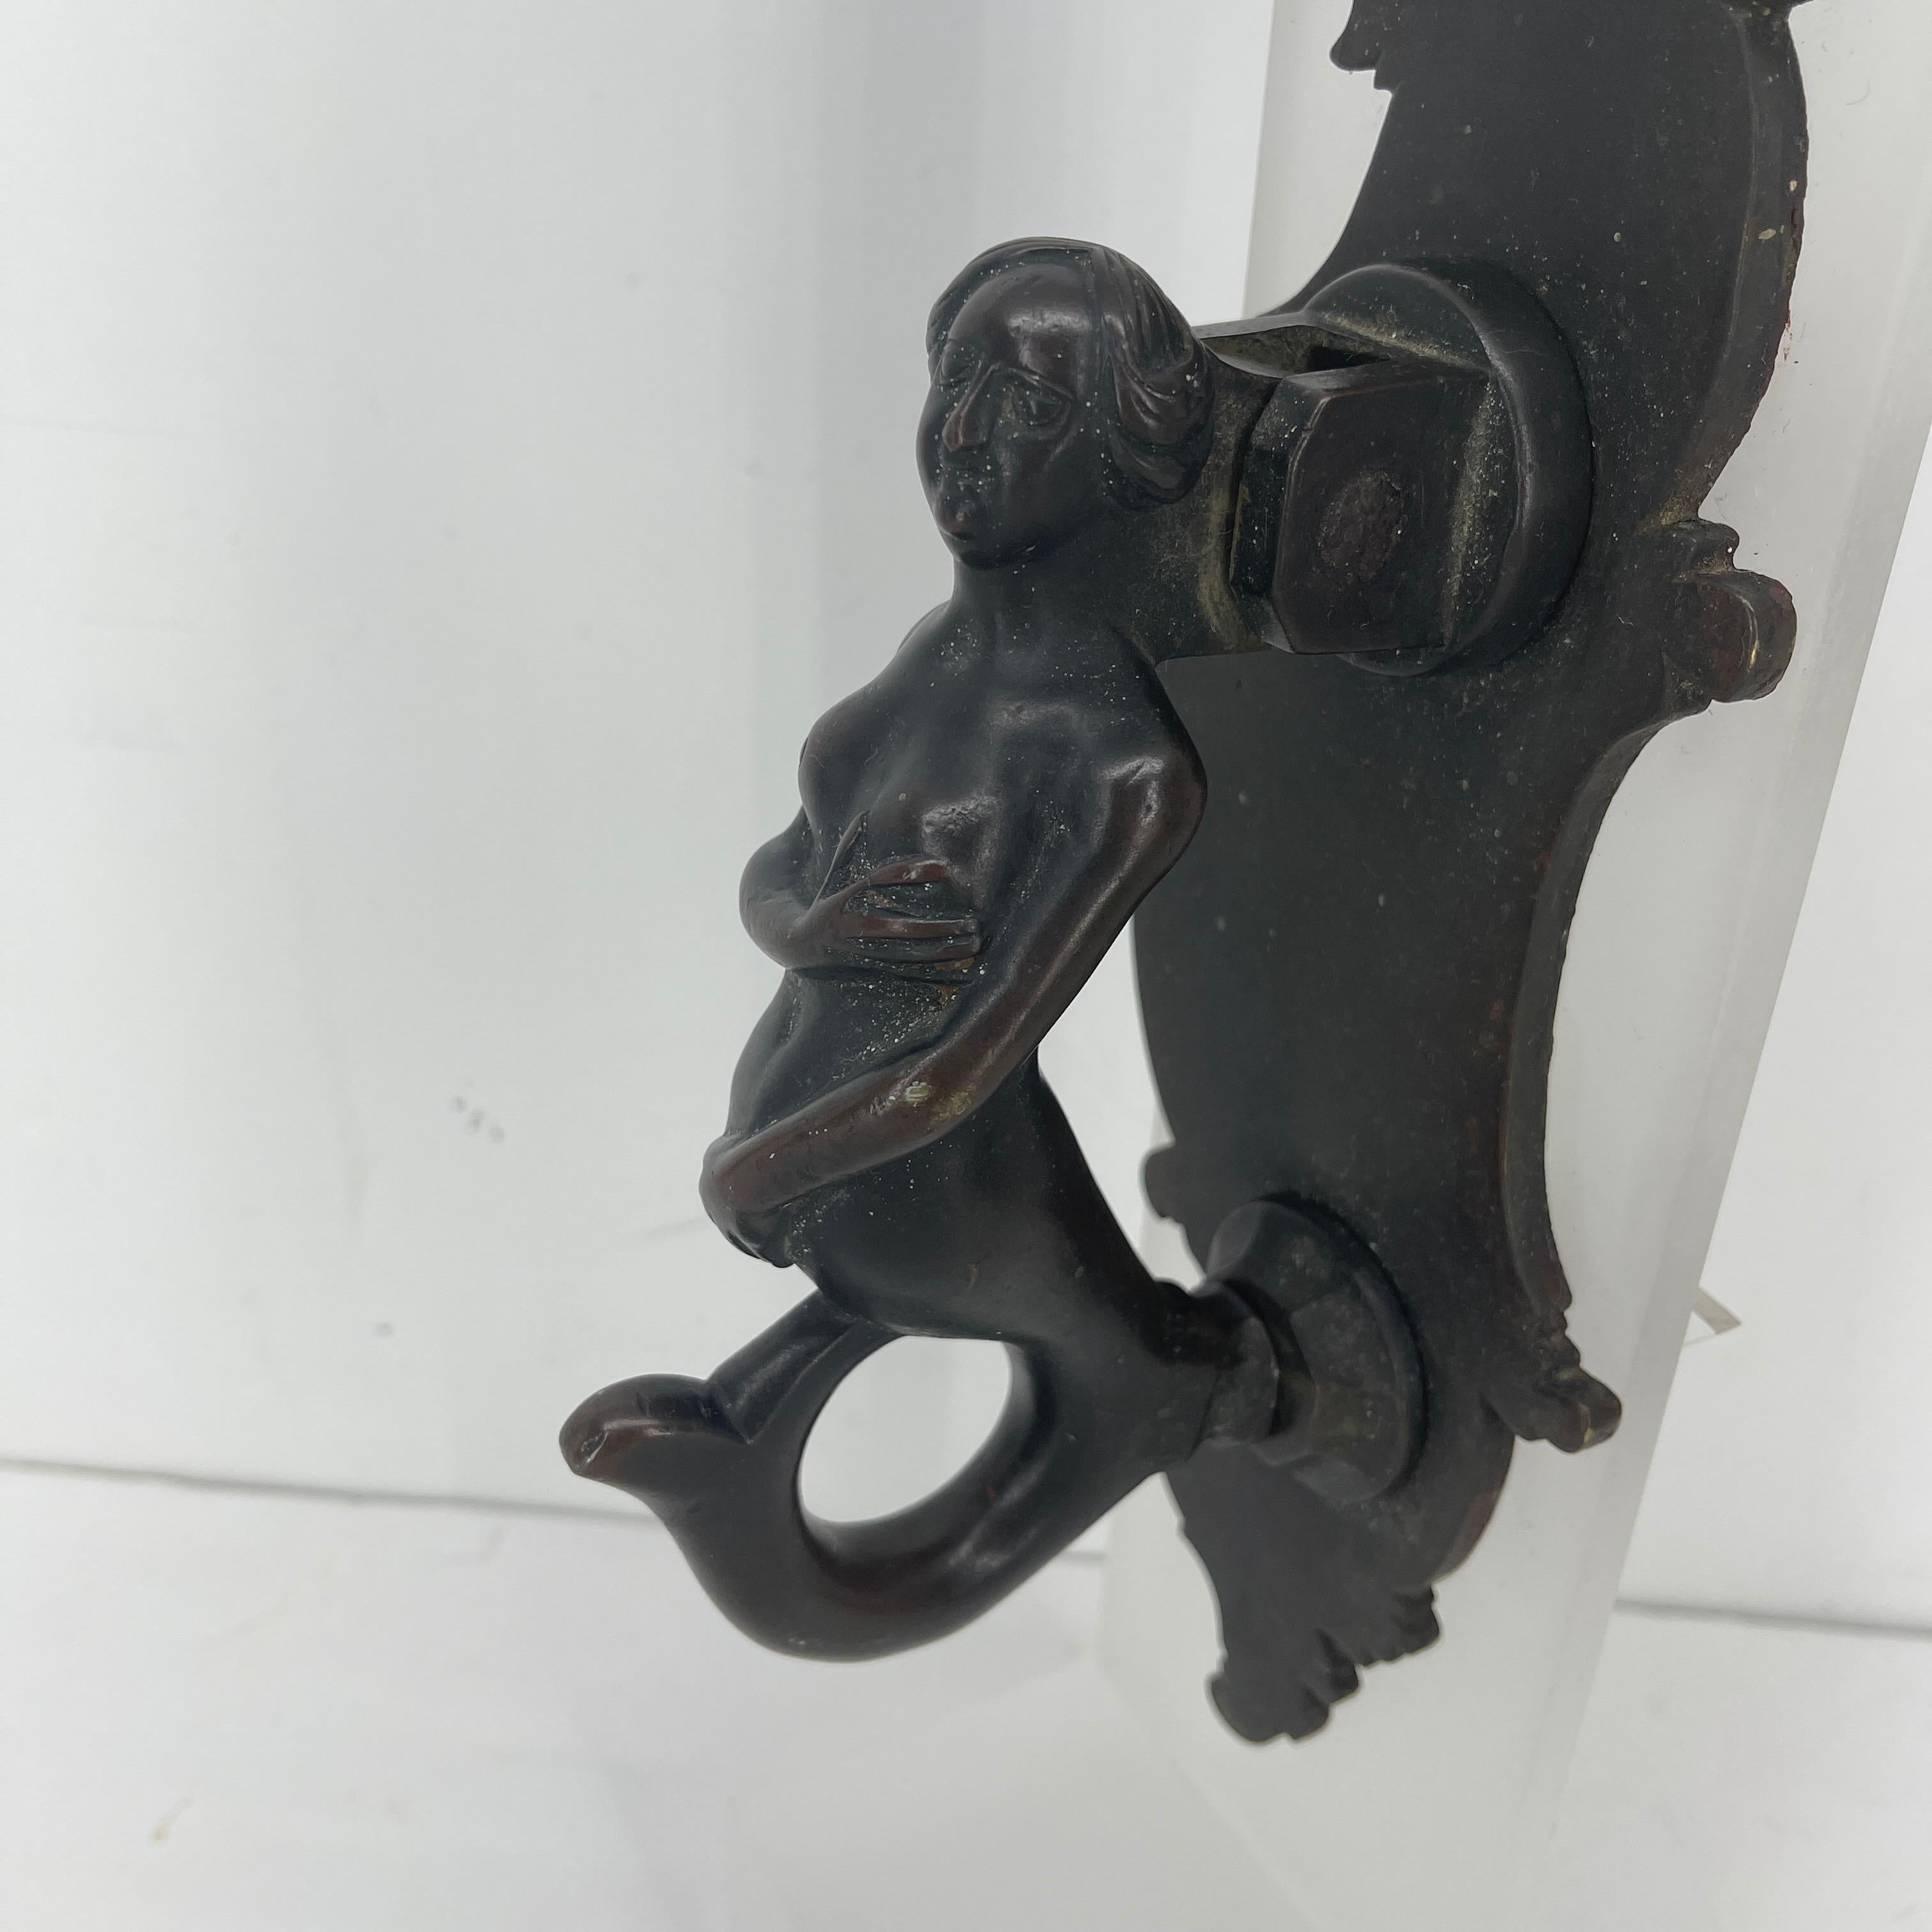 Early German baroque bronze mermaid door knocker on frosted lucite stand.
This door knocker is a work of art; heavy bronze with original patina, hand crafted figure of a mermaid with expressive face and body, and mounted to thick lucite stand. With